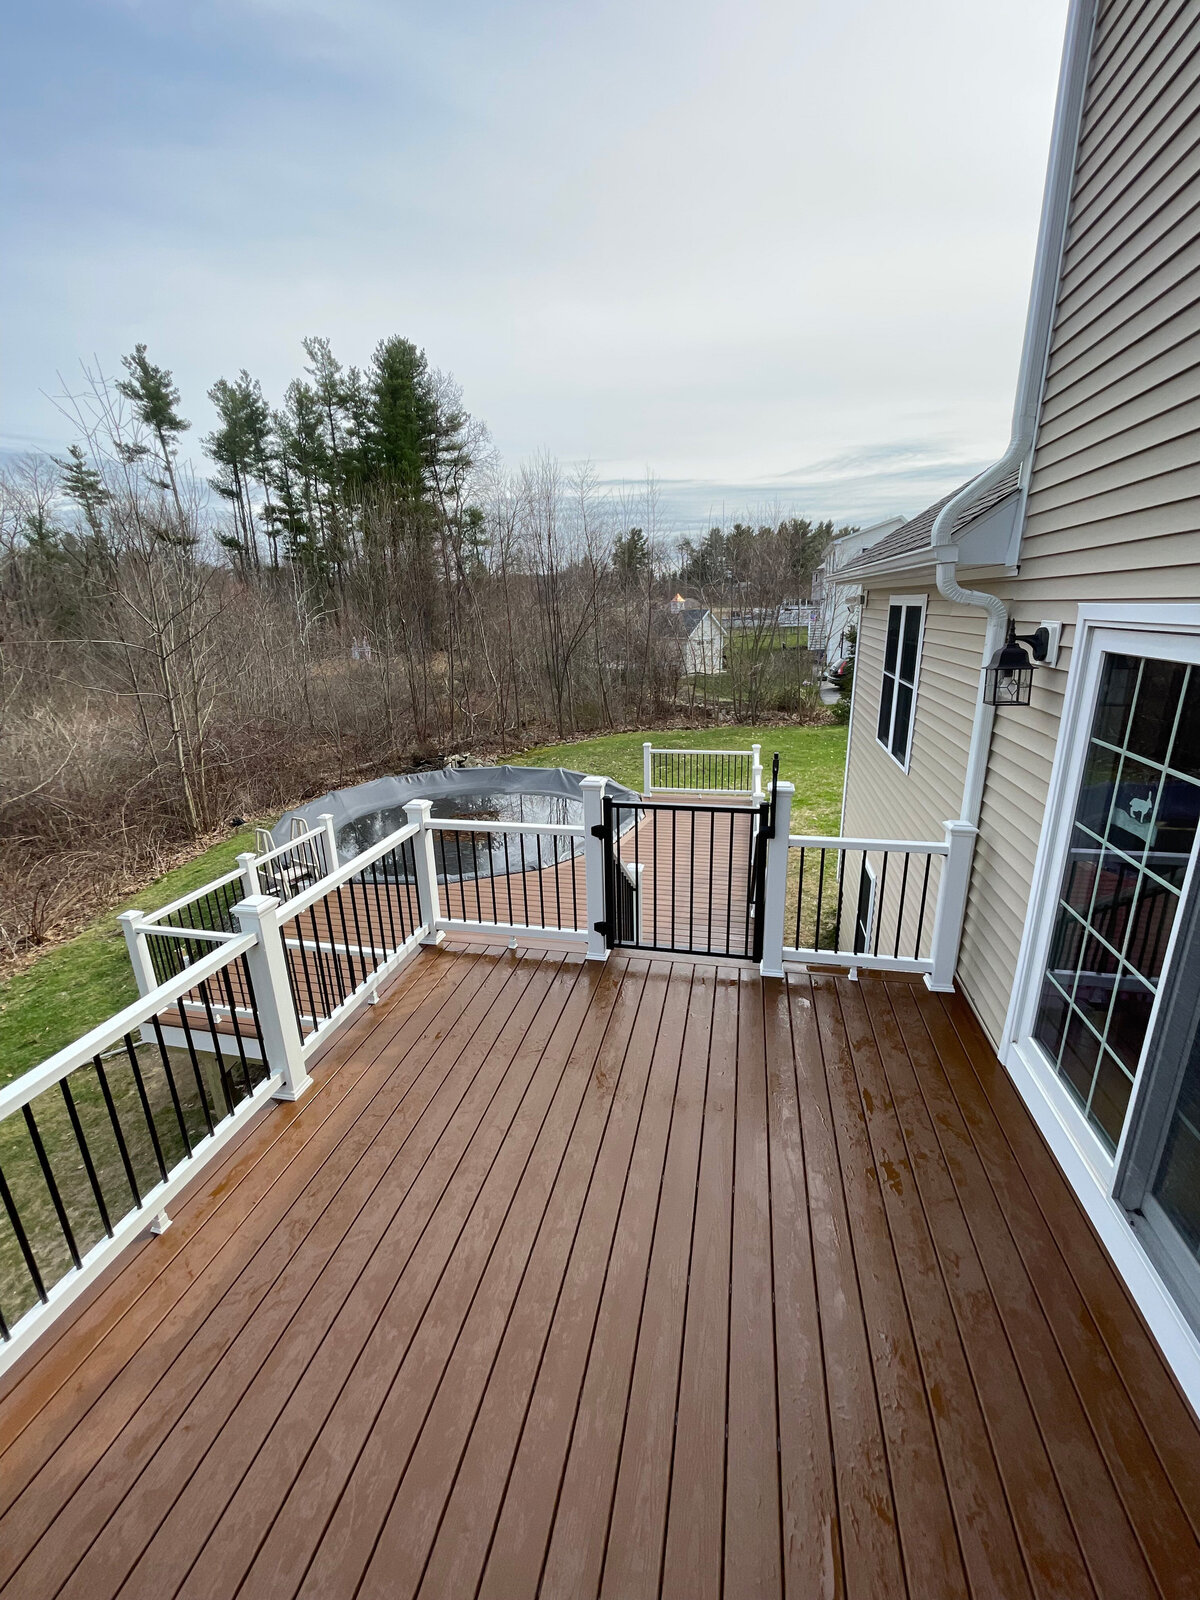 A look from above of a two tier deck built with composite and PVC railings with a child safety gate on the stairs